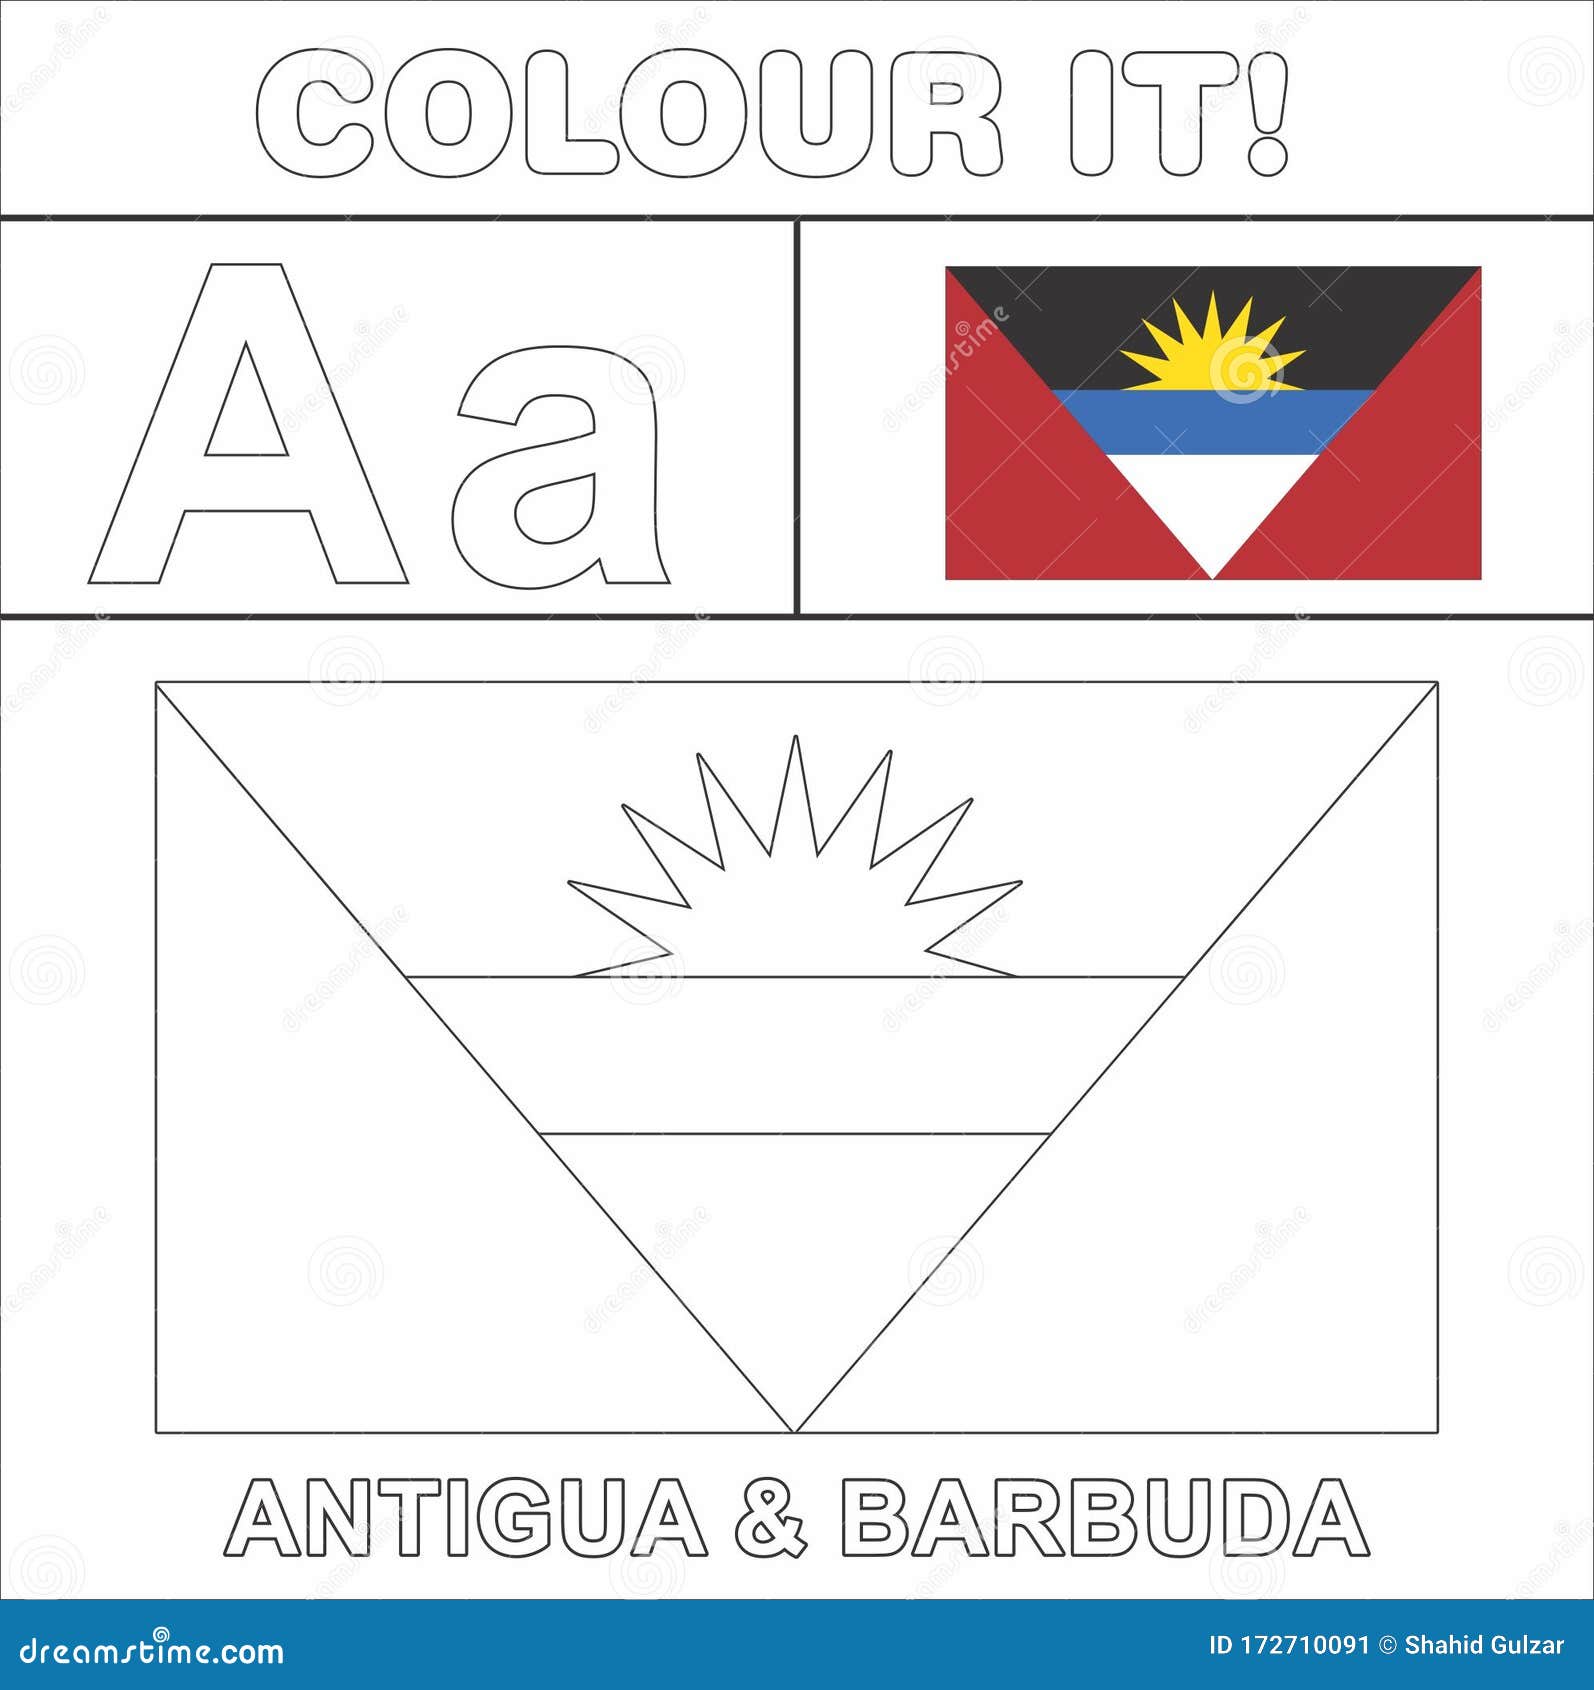 colour it kids colouring page country starting from english letter a a antigua & barbuda  how to colorflag